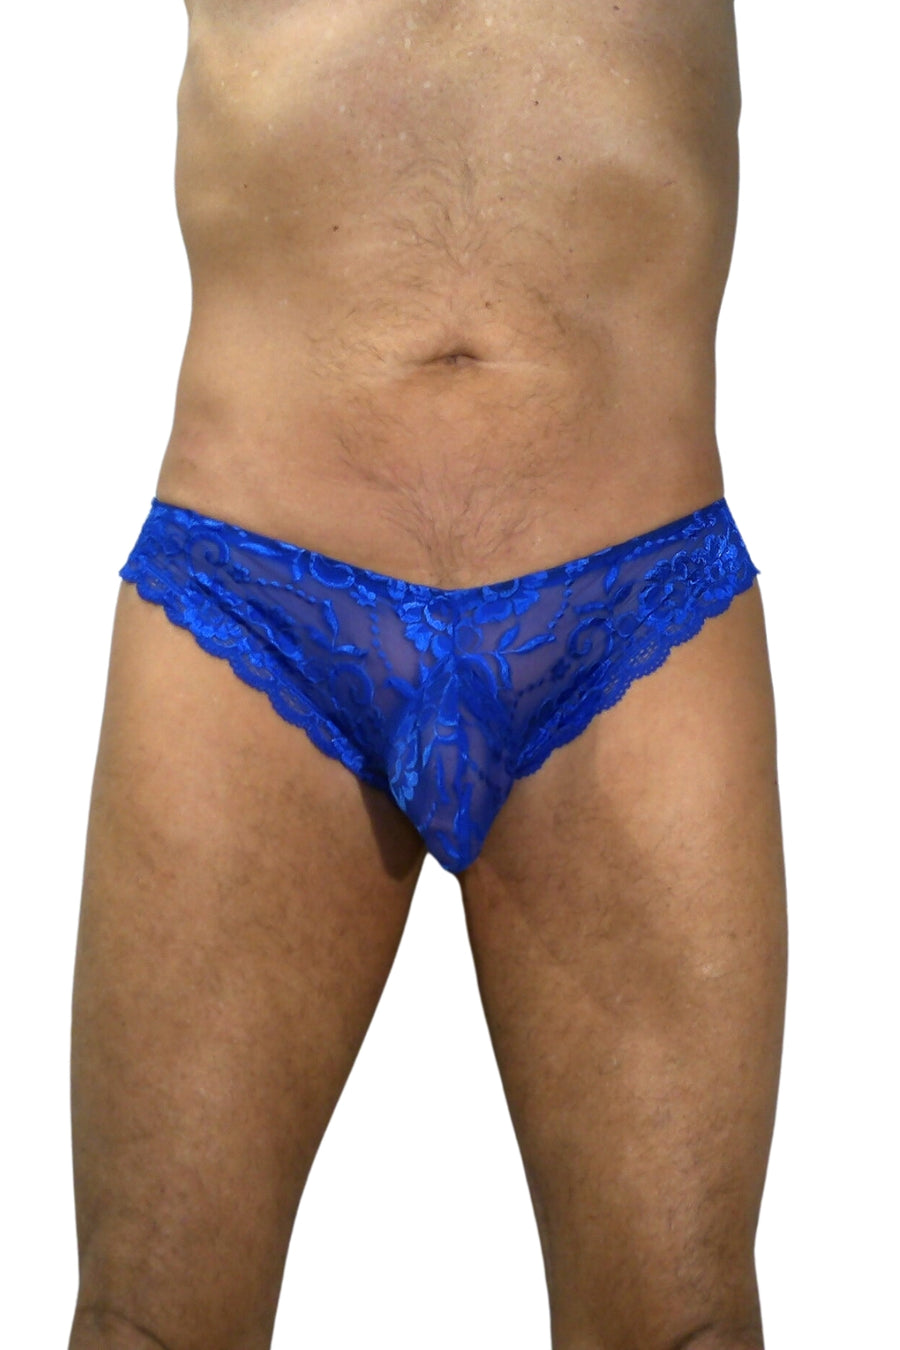 Full front view of Dark Blue Lace Brief. Model is 6'2" 190 pounds, 8 inches cut full shaved around genitals